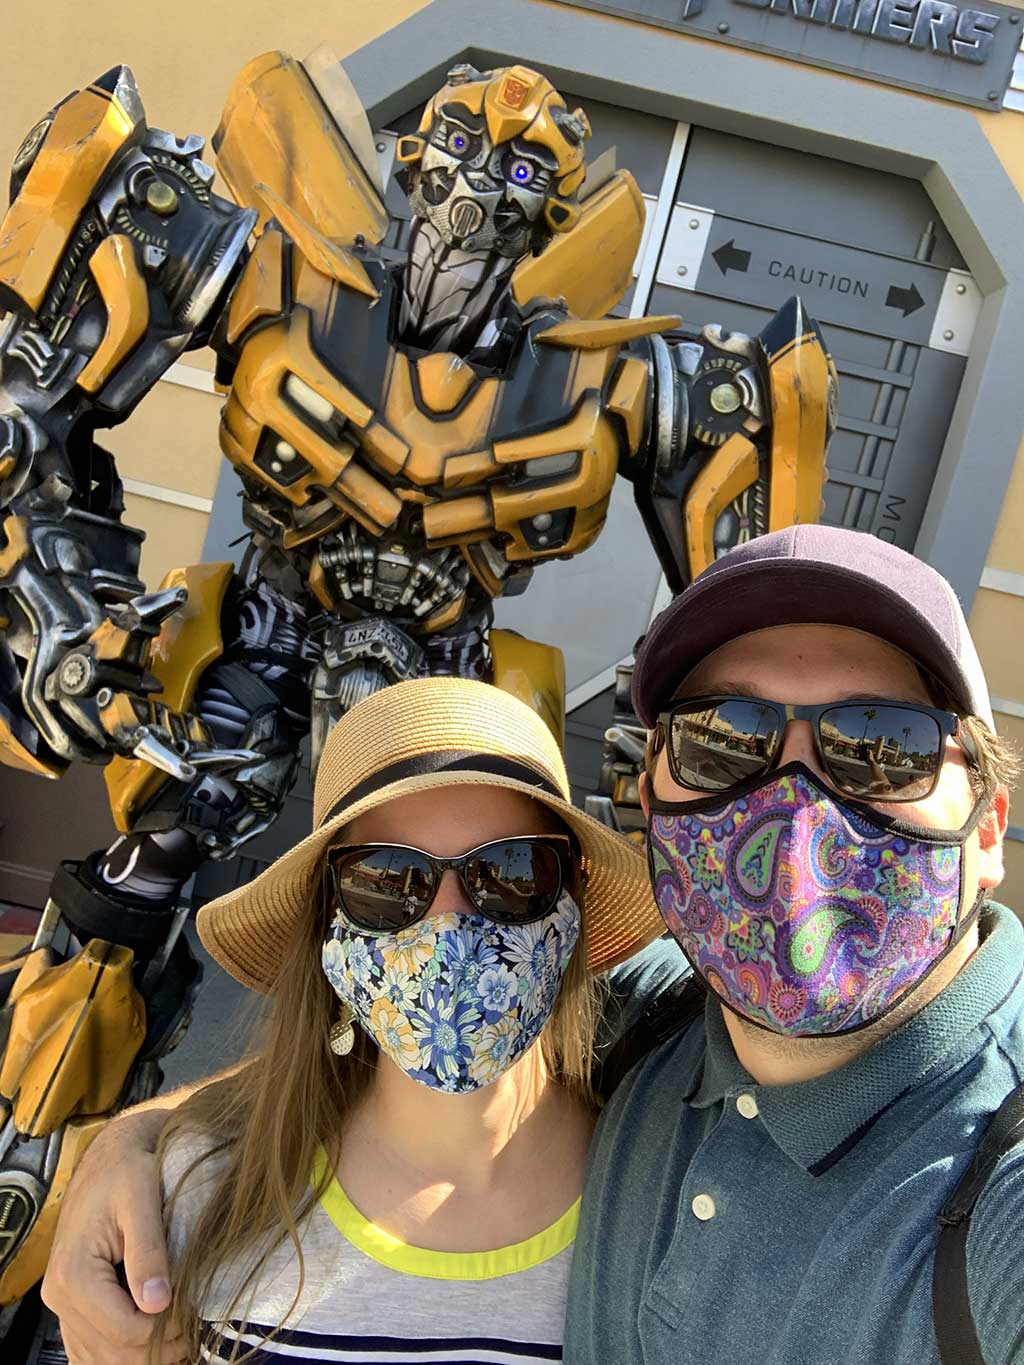 drive-swim-fly-universal-studios-hollywood-california-theme-park-transformers-movie-bumblebee-character